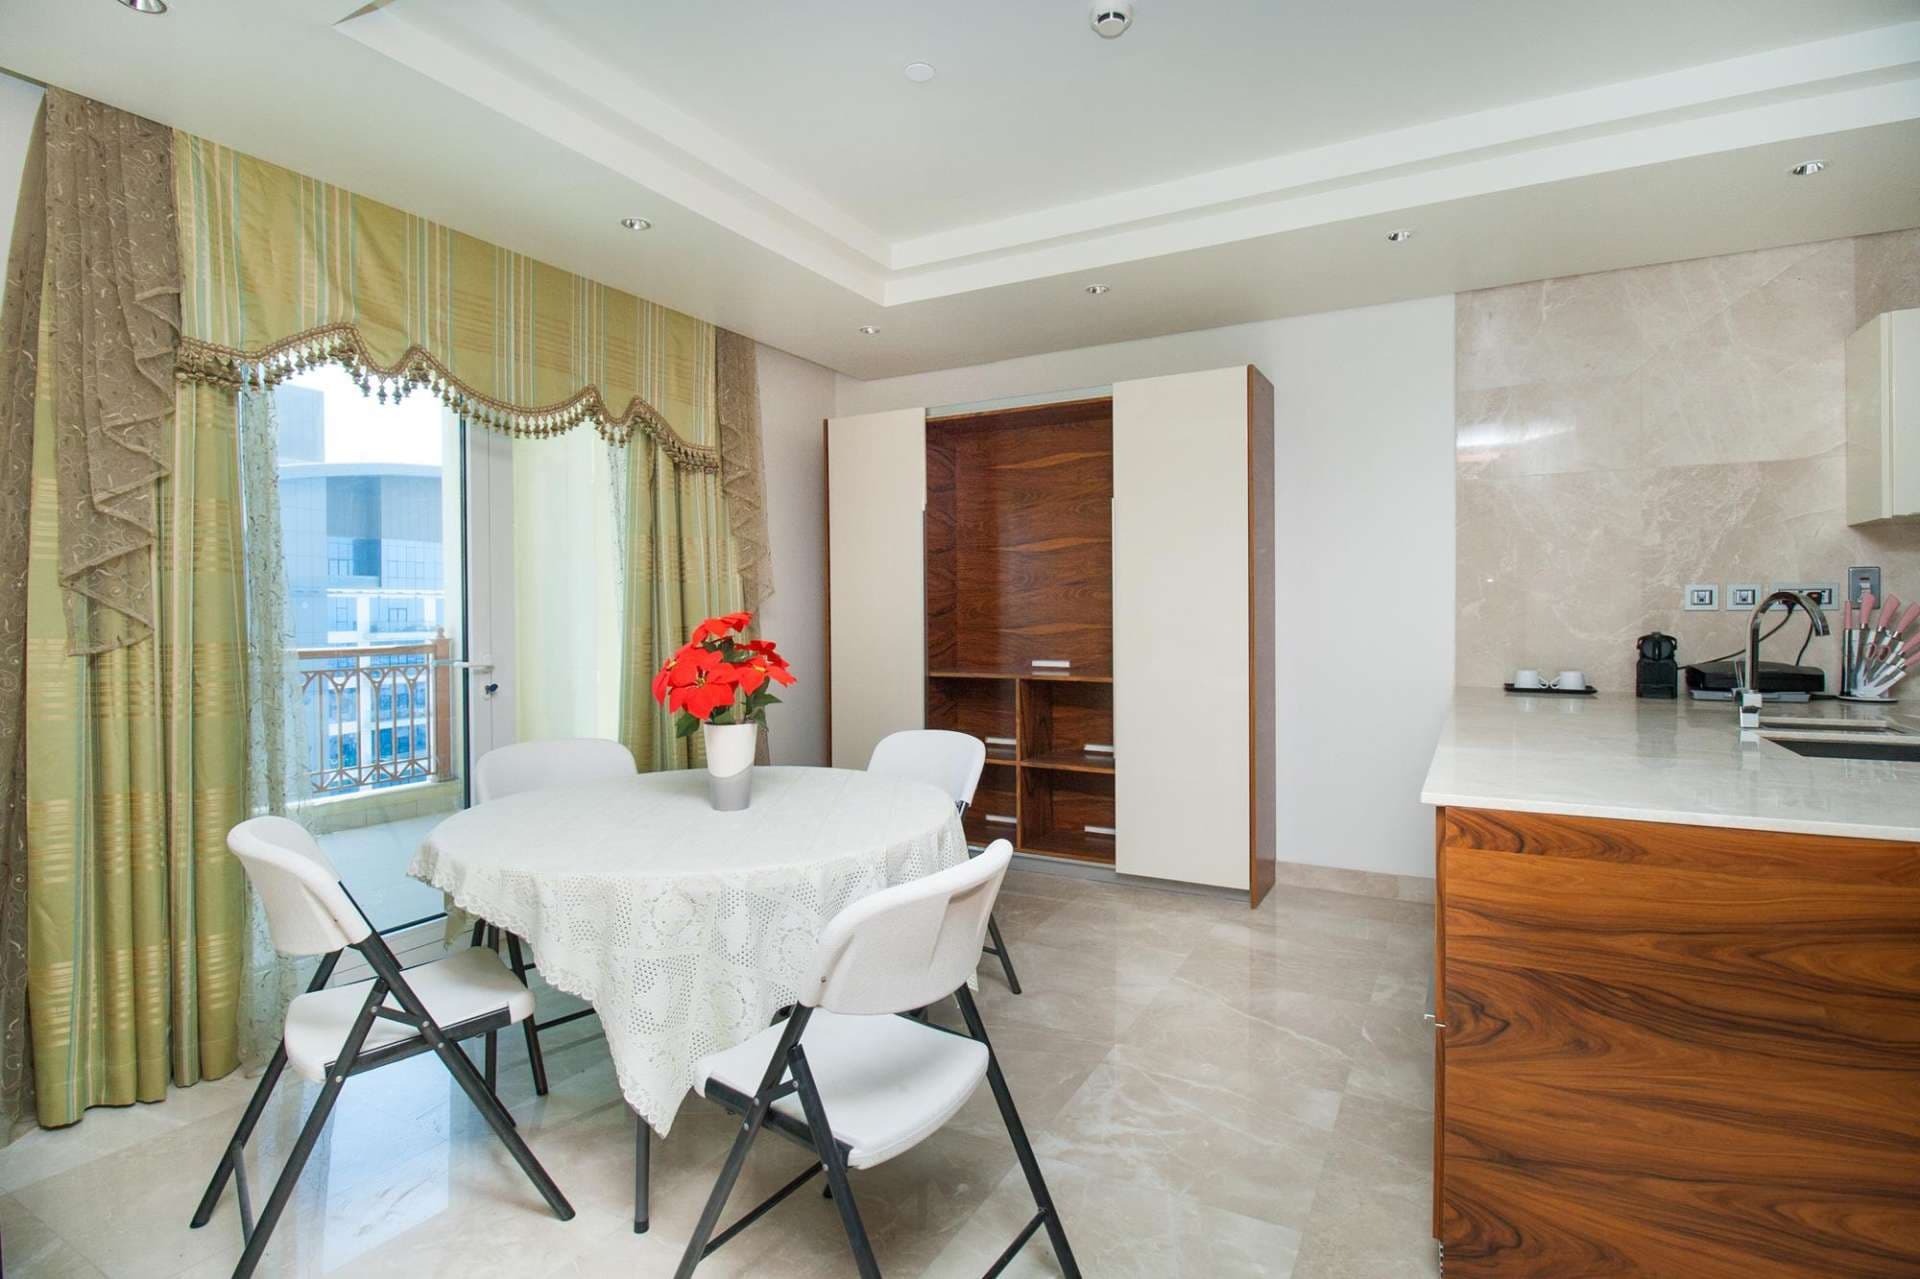 4 Bedroom Penthouse For Rent Marina Residences Lp04862 2a93321730718200.jpg